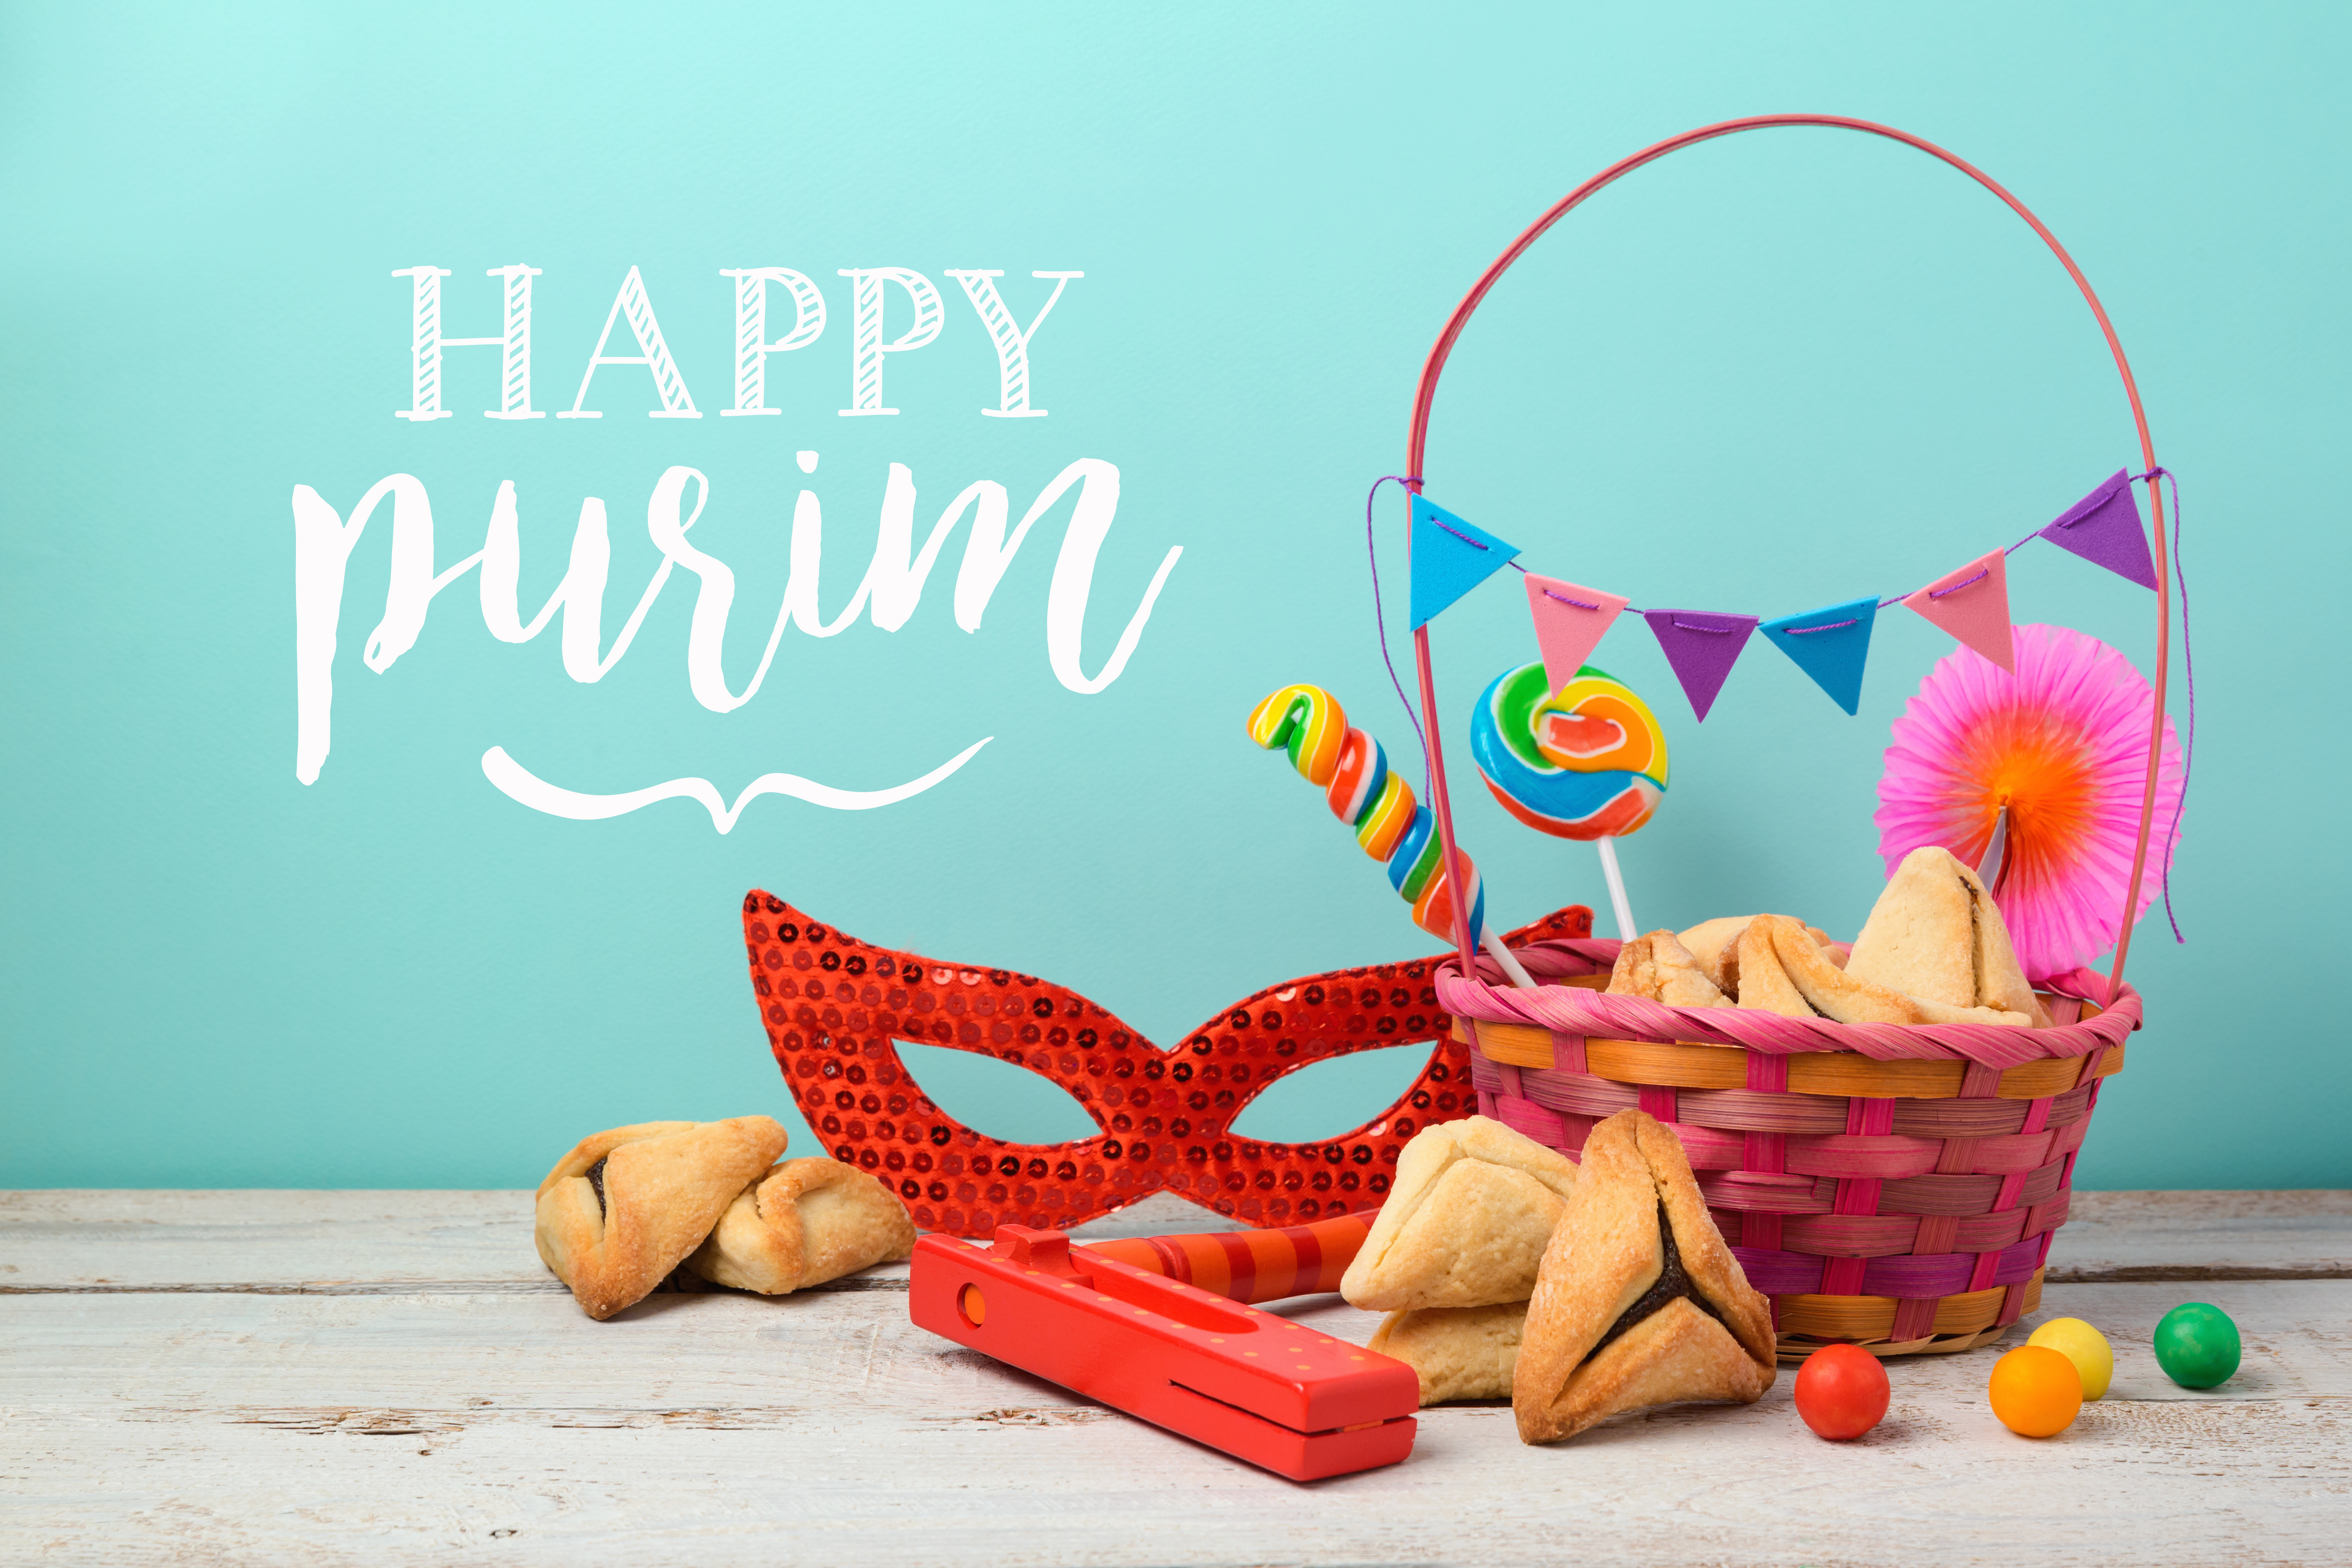 basket filled with treats words stating "happy purim"